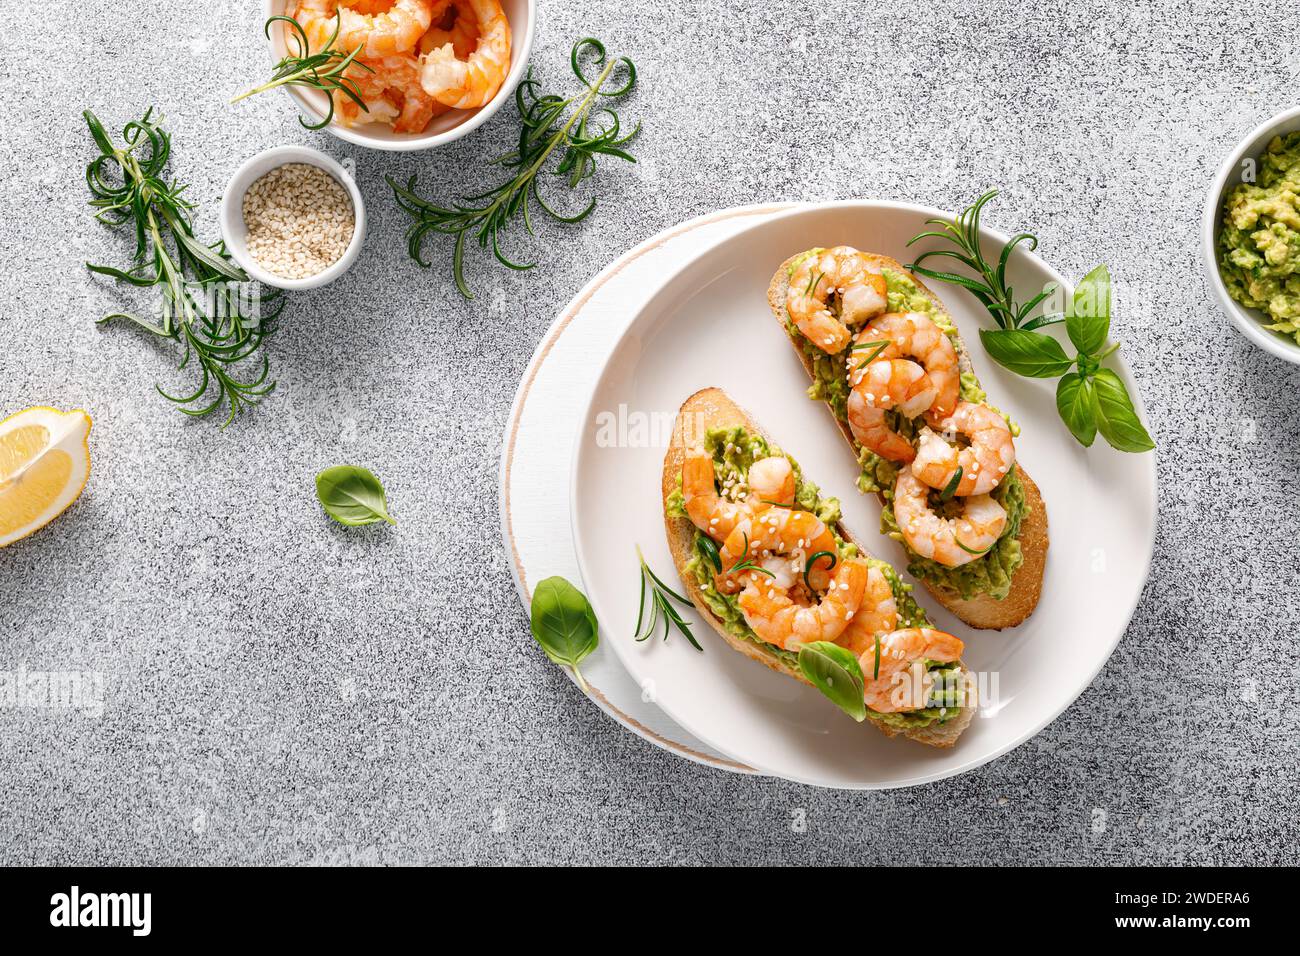 Shrimp and avocado sandwich with baguette and sesame. Top view Stock Photo